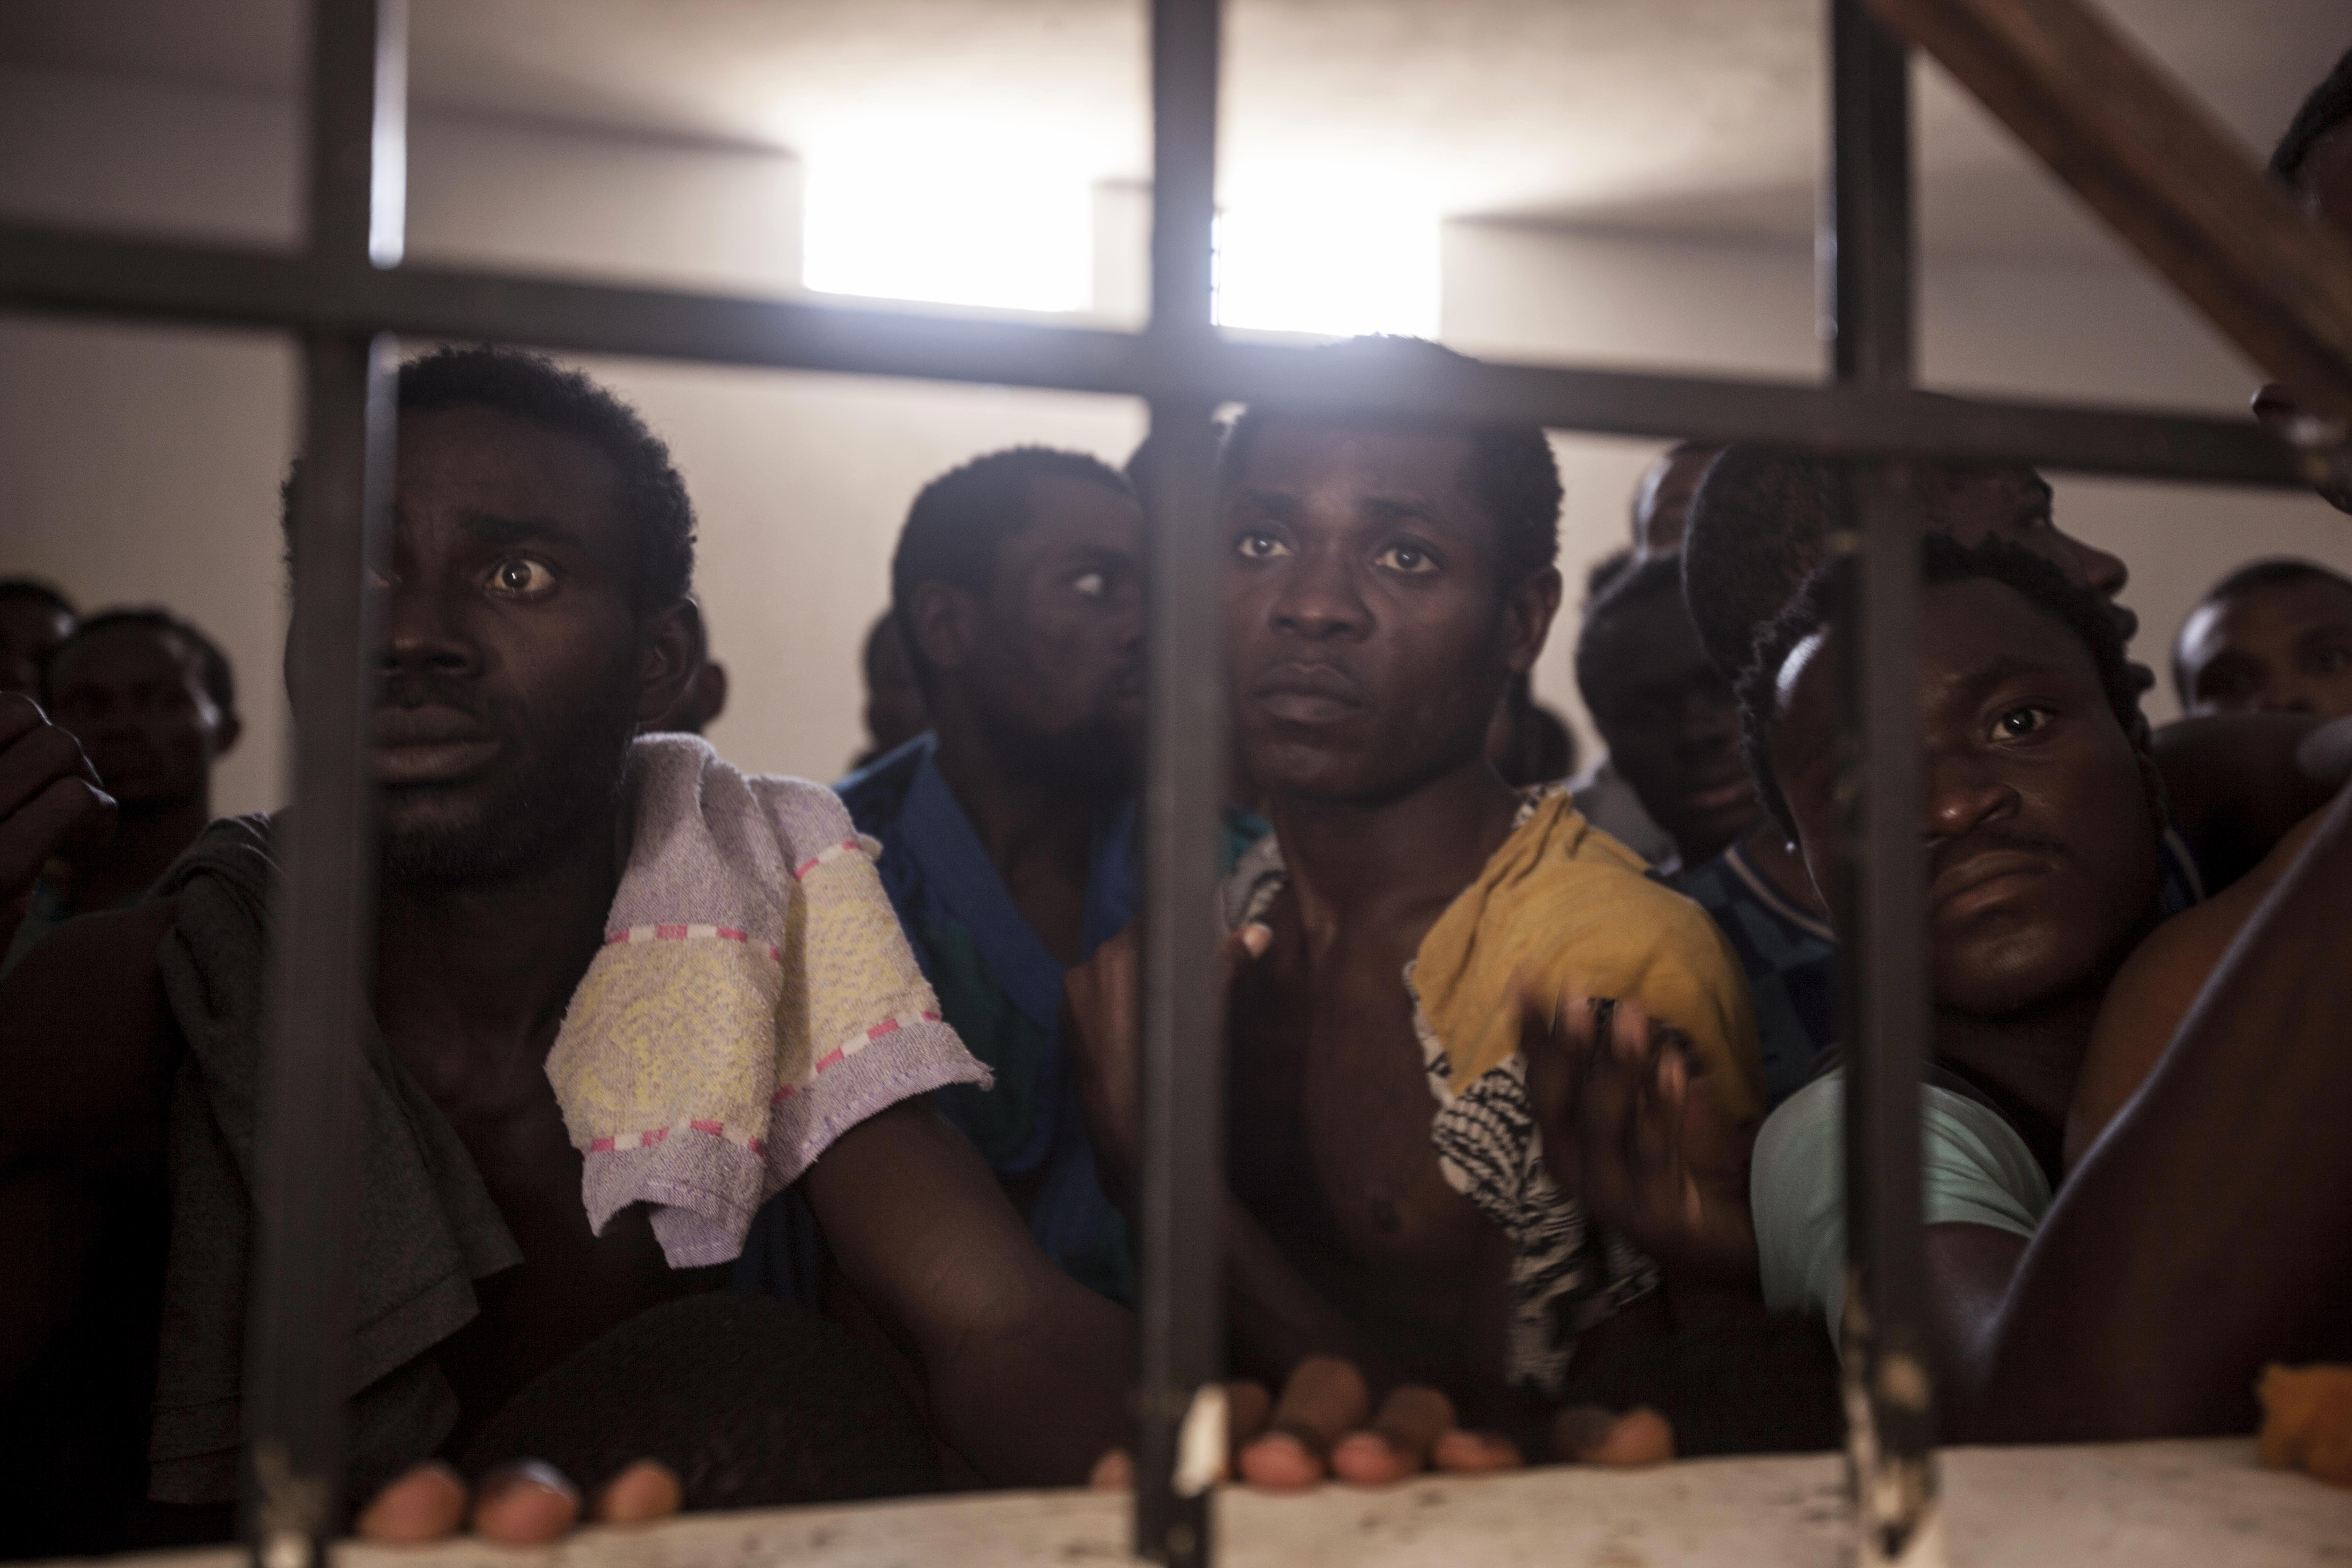 Sub-Saharan migrants and refugees begging for their release in a detention center in Surman, Libya.